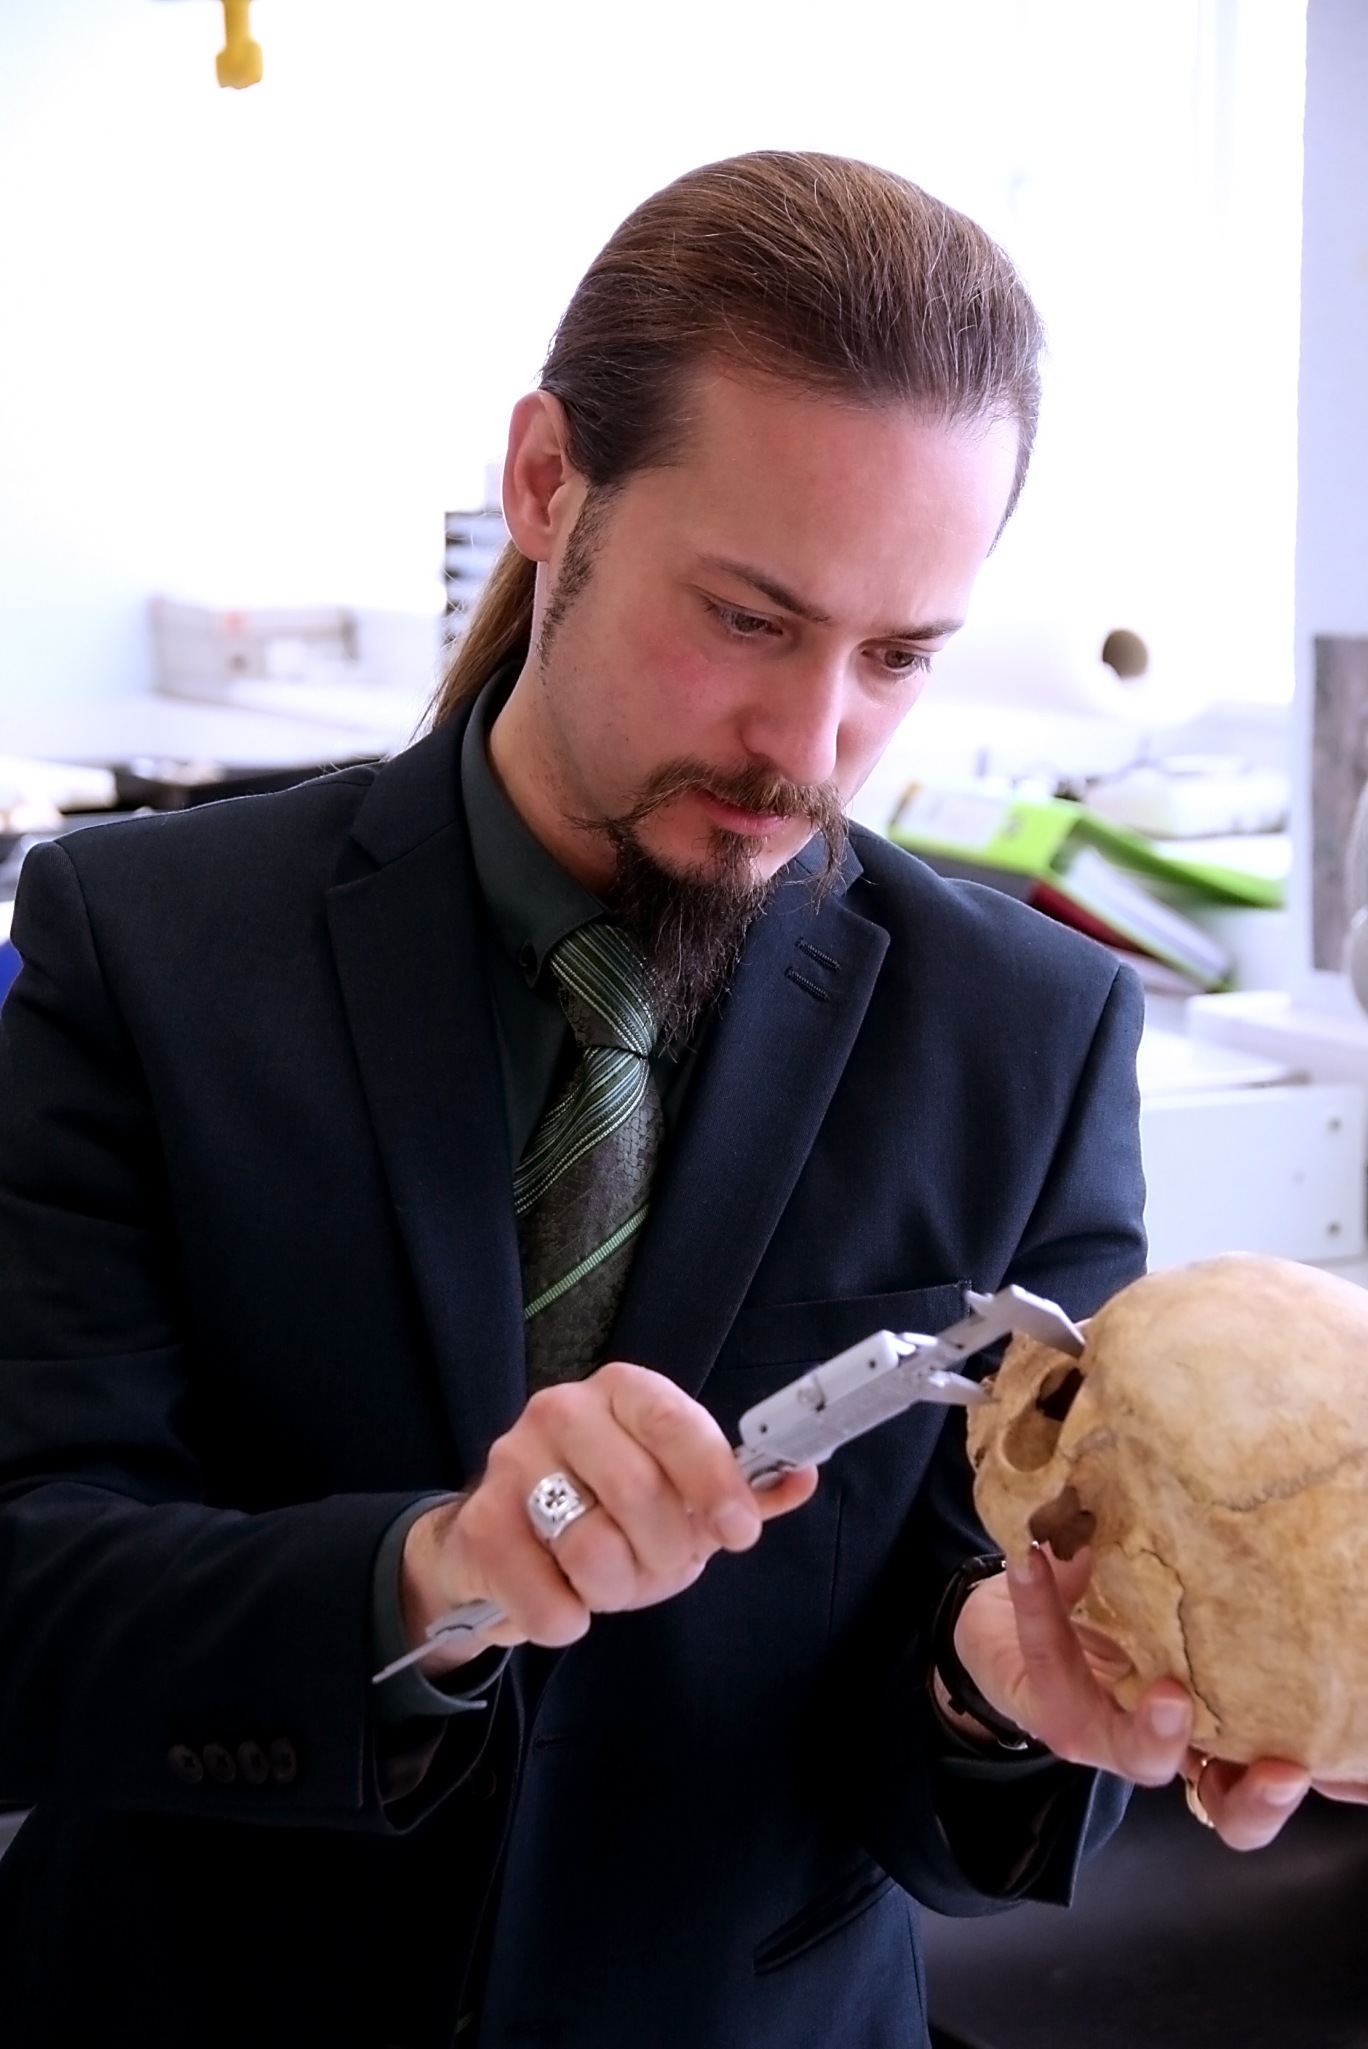 forensic anthropology research